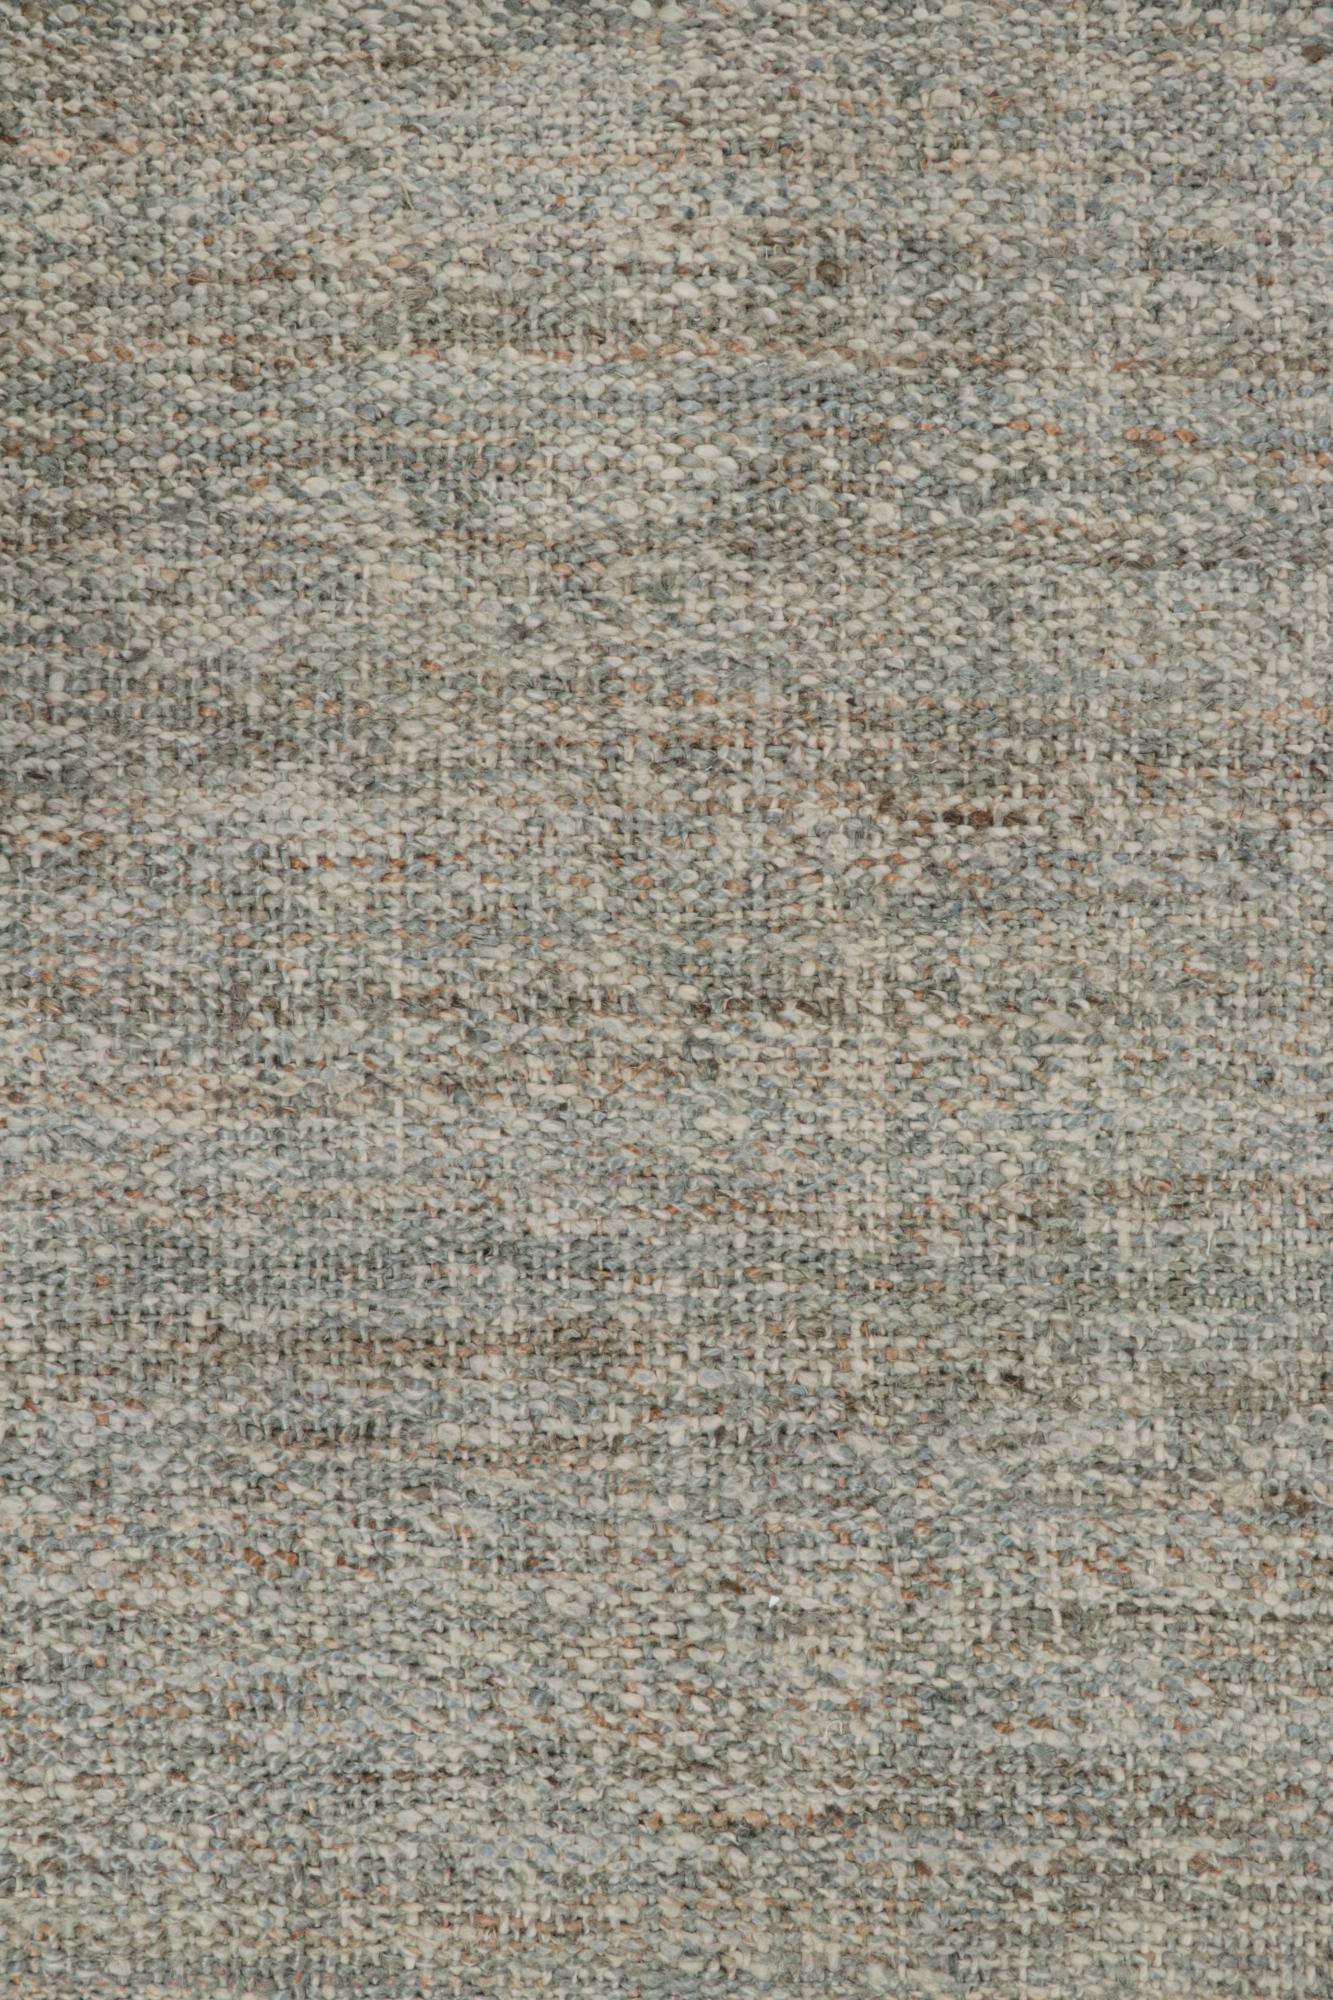 Rug & Kilim’s Contemporary Jute Kilim in Tones of Gray In New Condition For Sale In Long Island City, NY